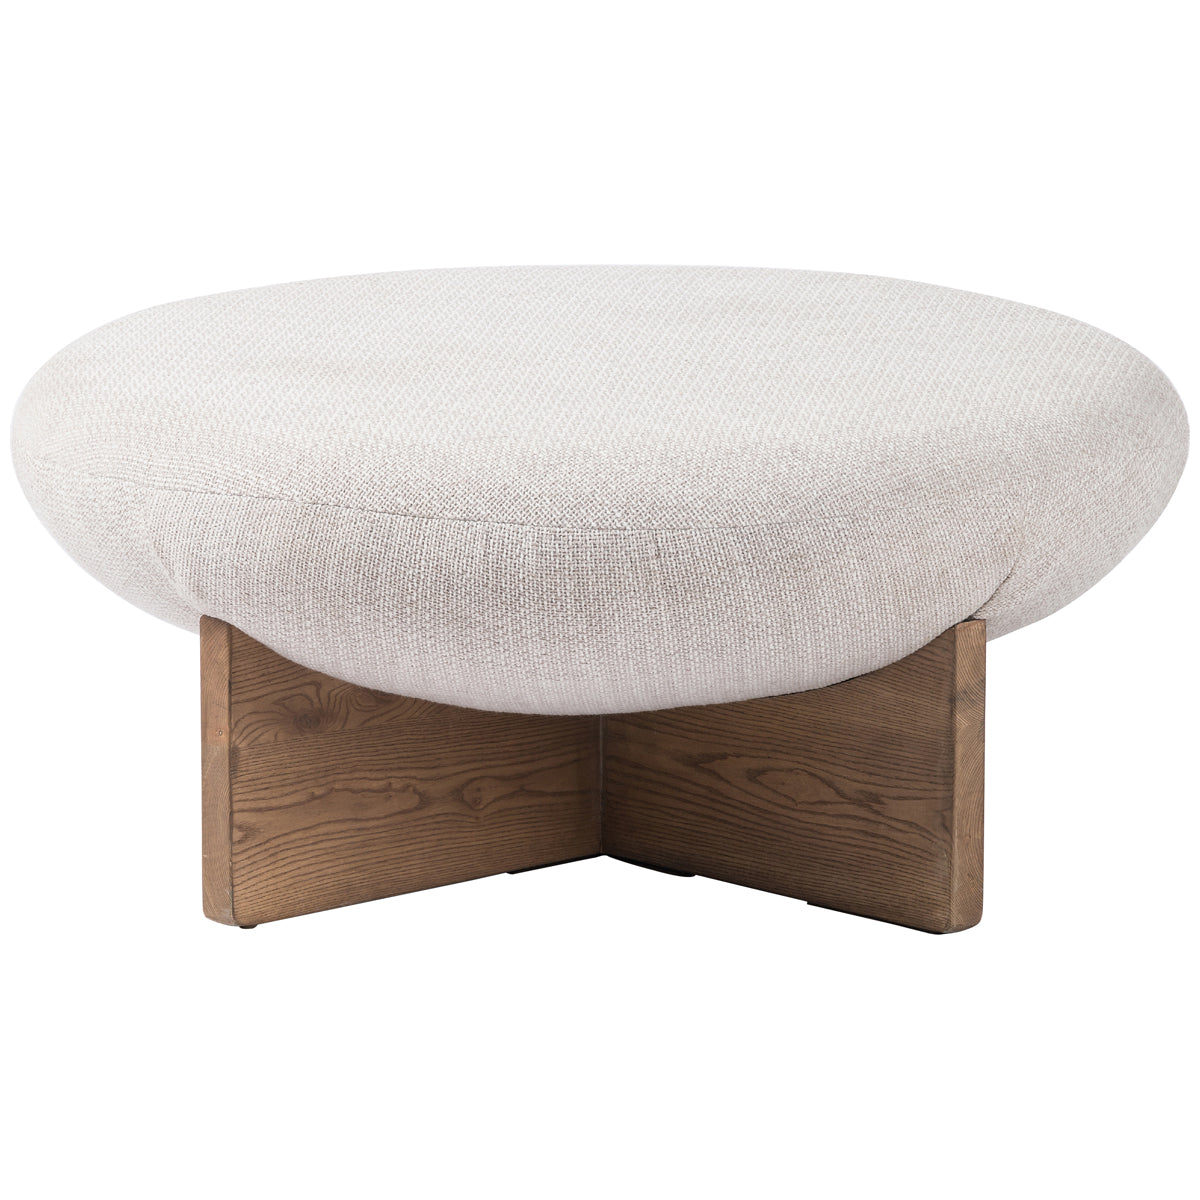 Four Hands Westgate Dax Large Ottoman - Gibson Wheat